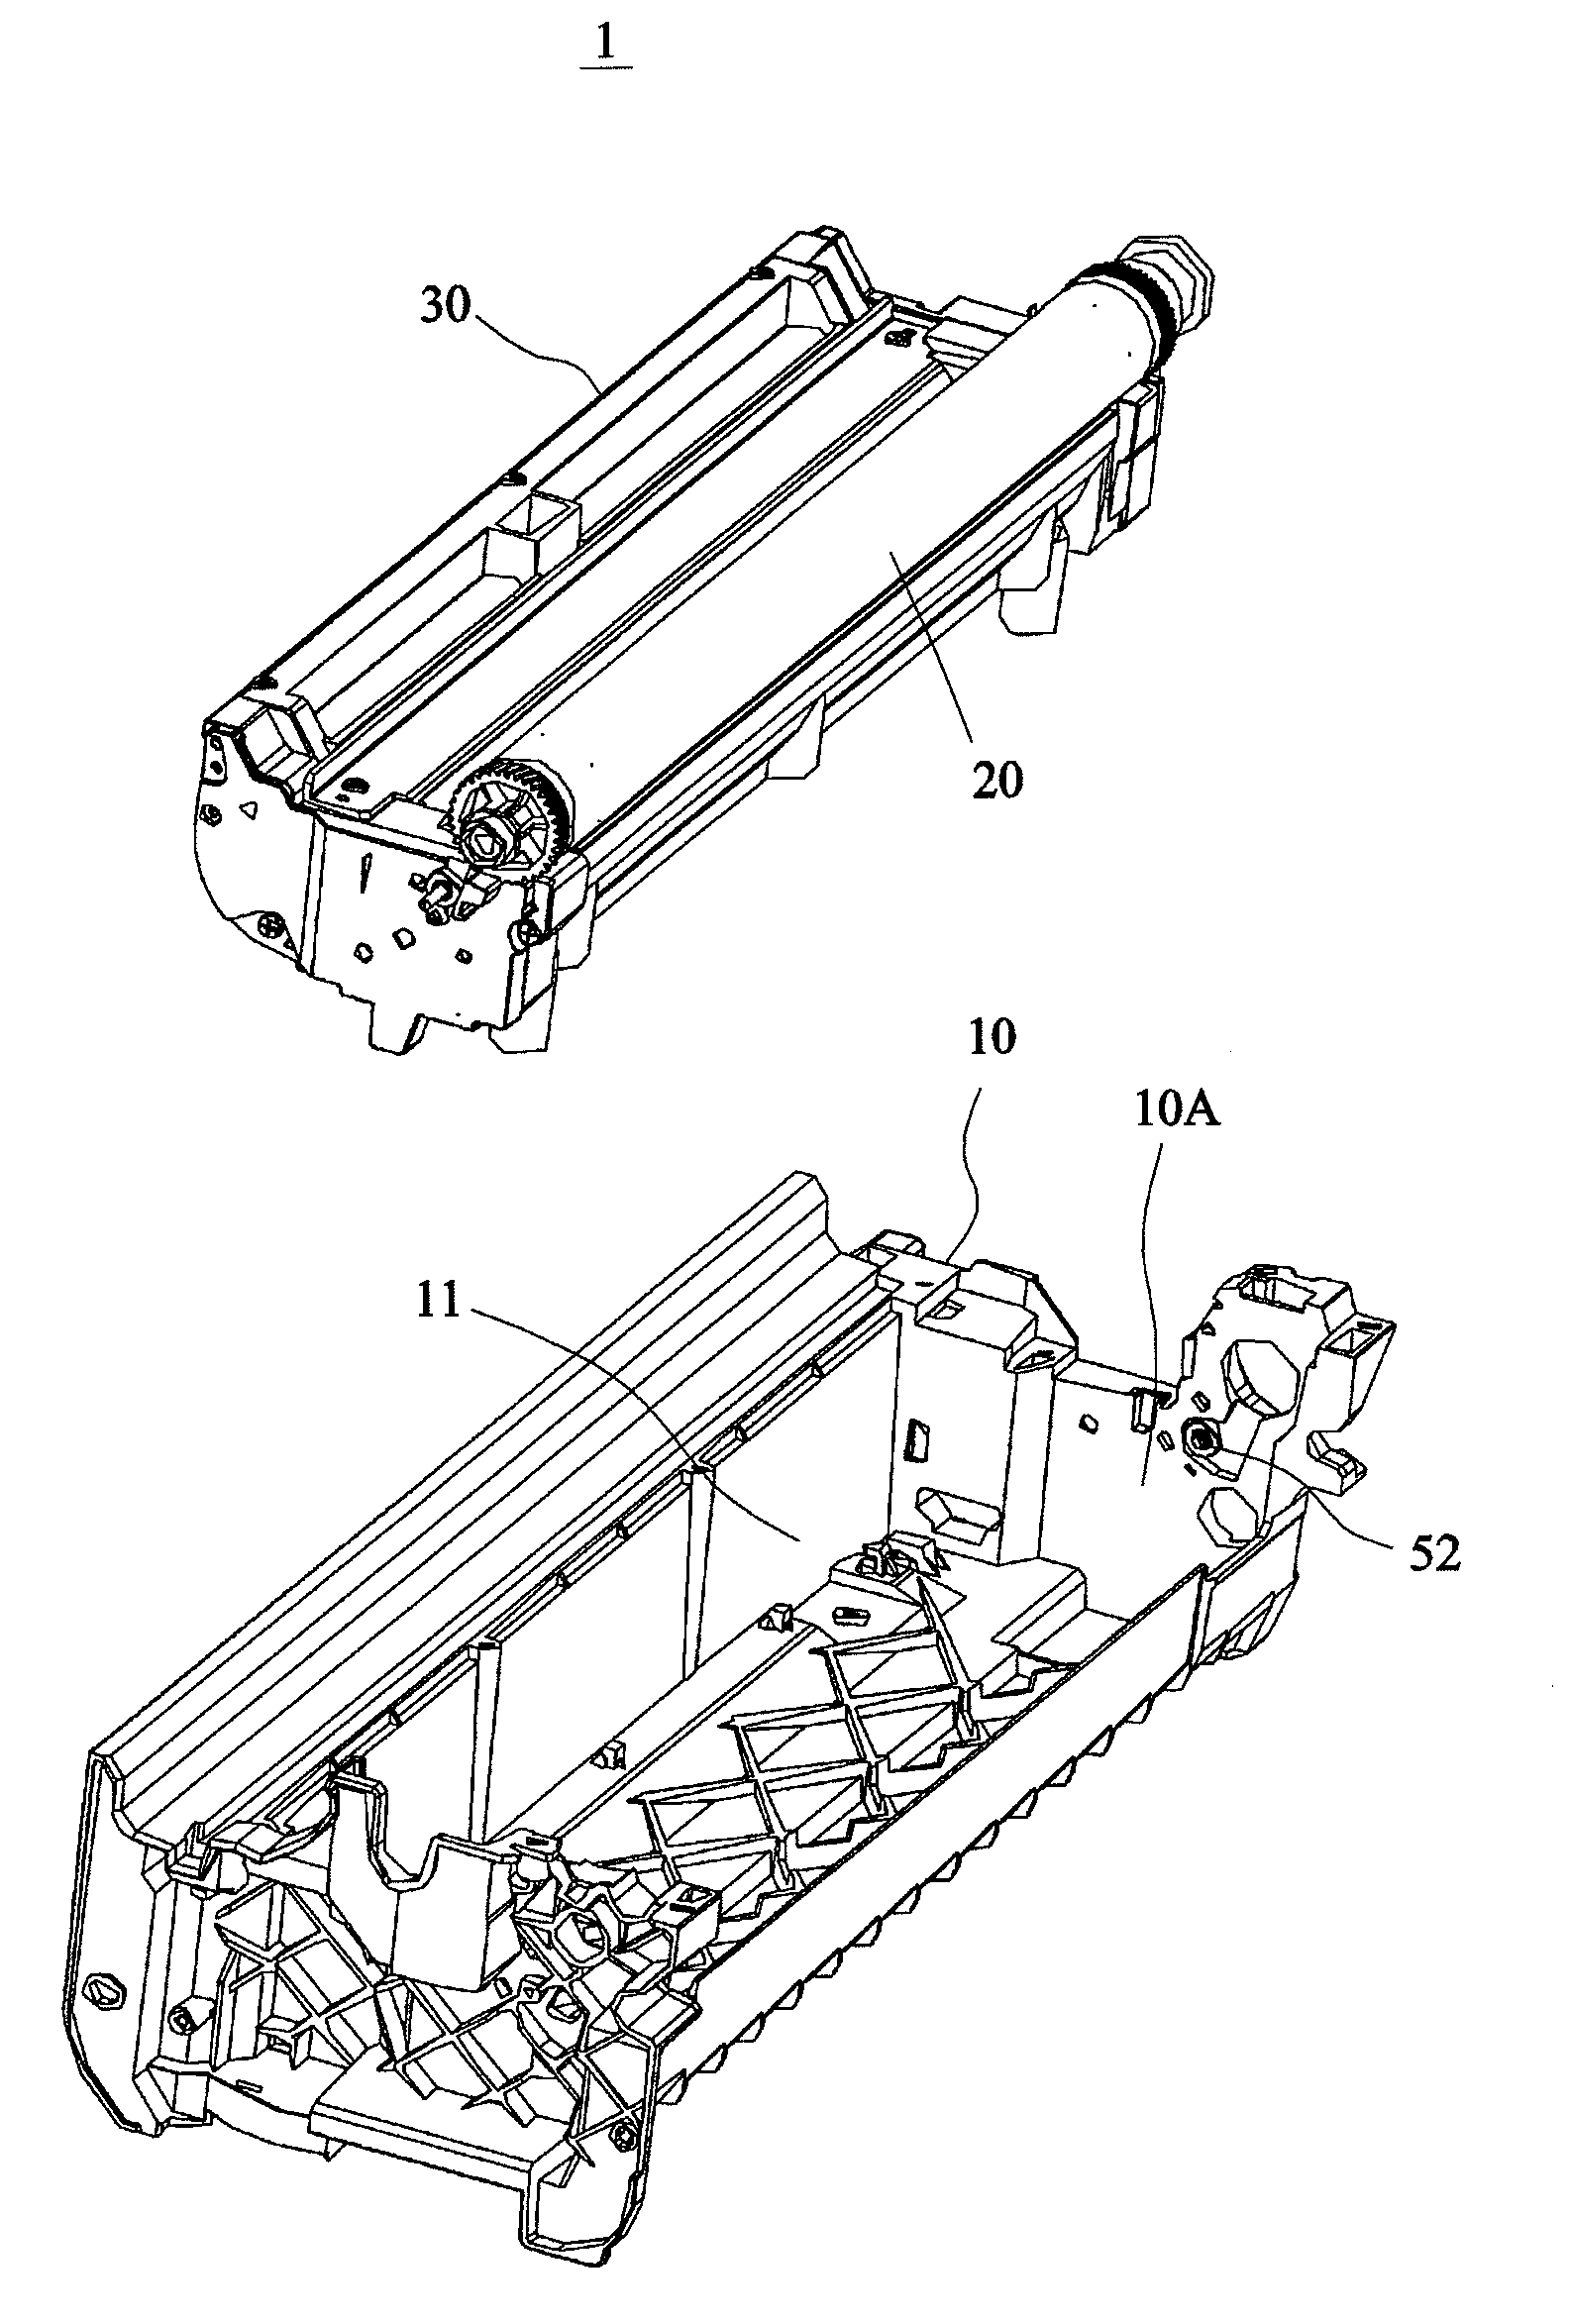 Image forming apparatus with top-mounted photosensitive drum